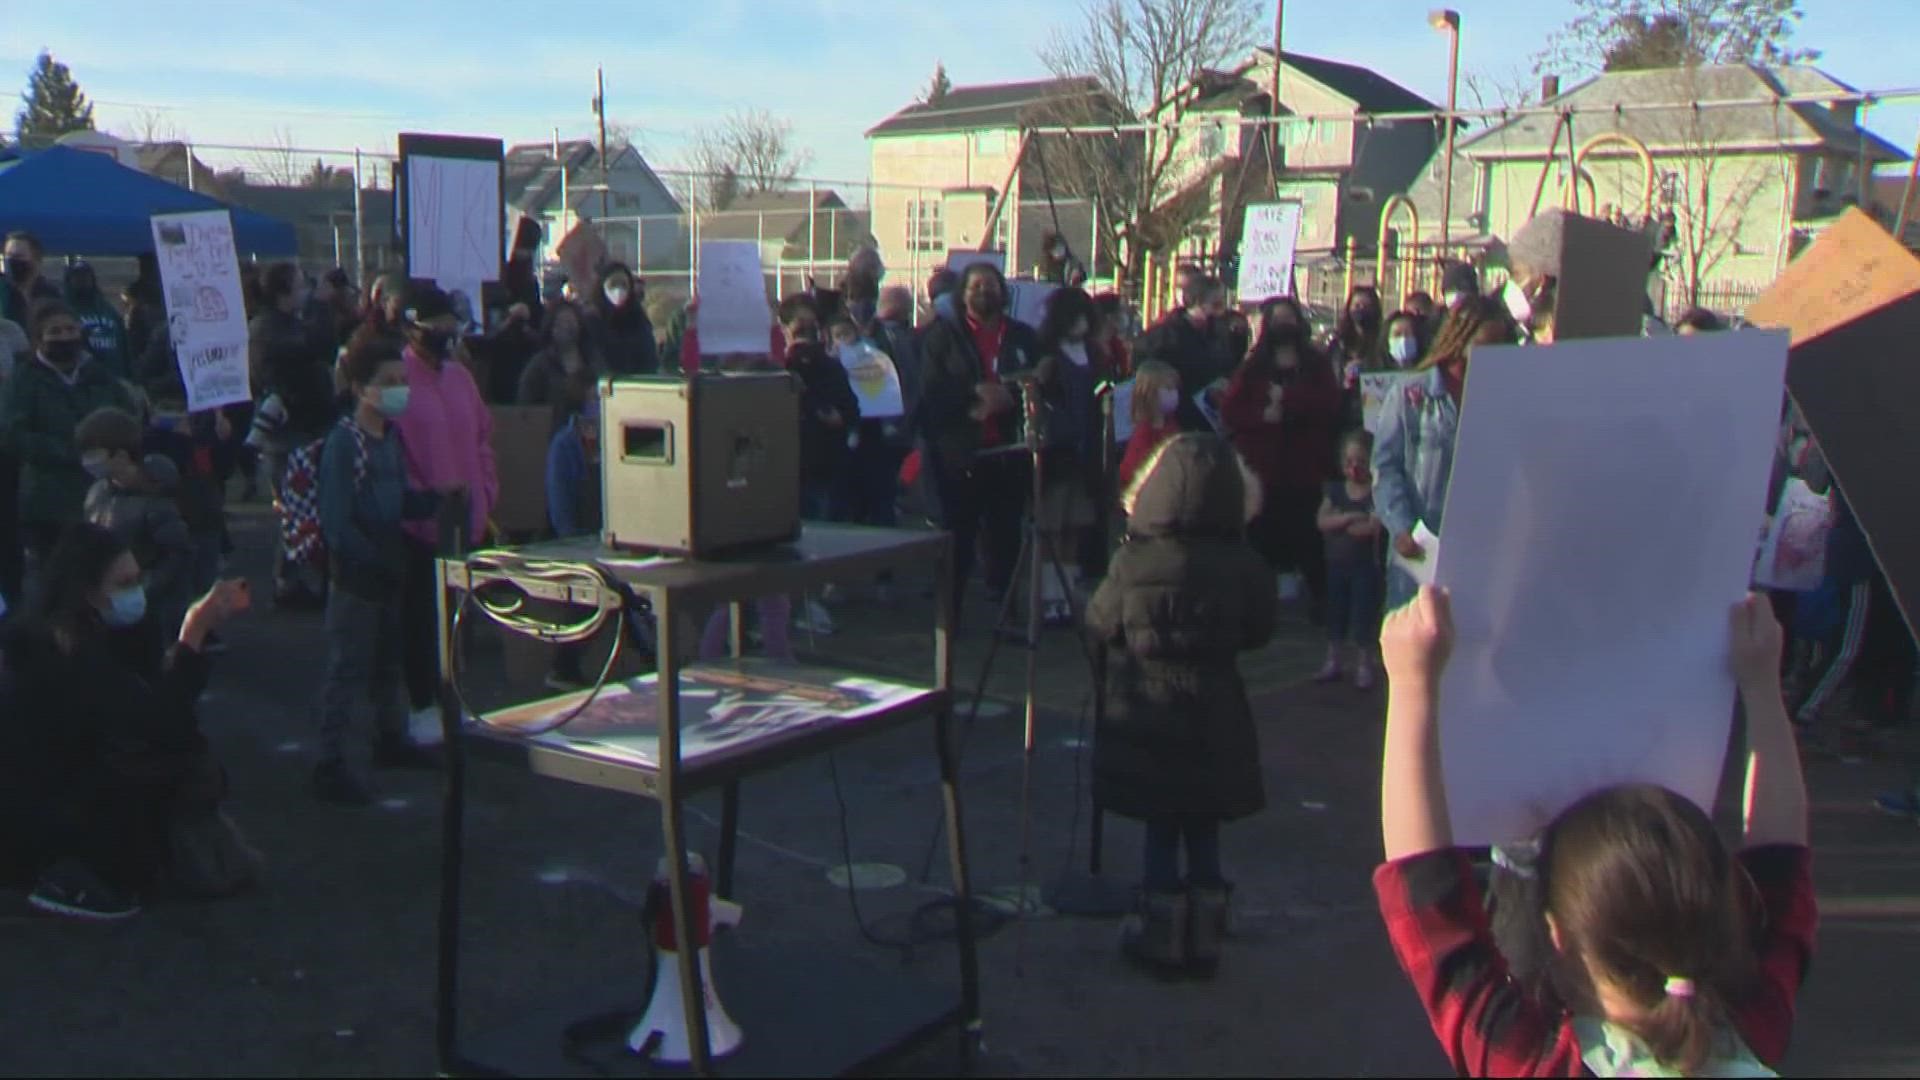 Hundreds rallied to encourage district officials to take the school out of consideration as a possible relocation site for Harriet Tubman Middle School.